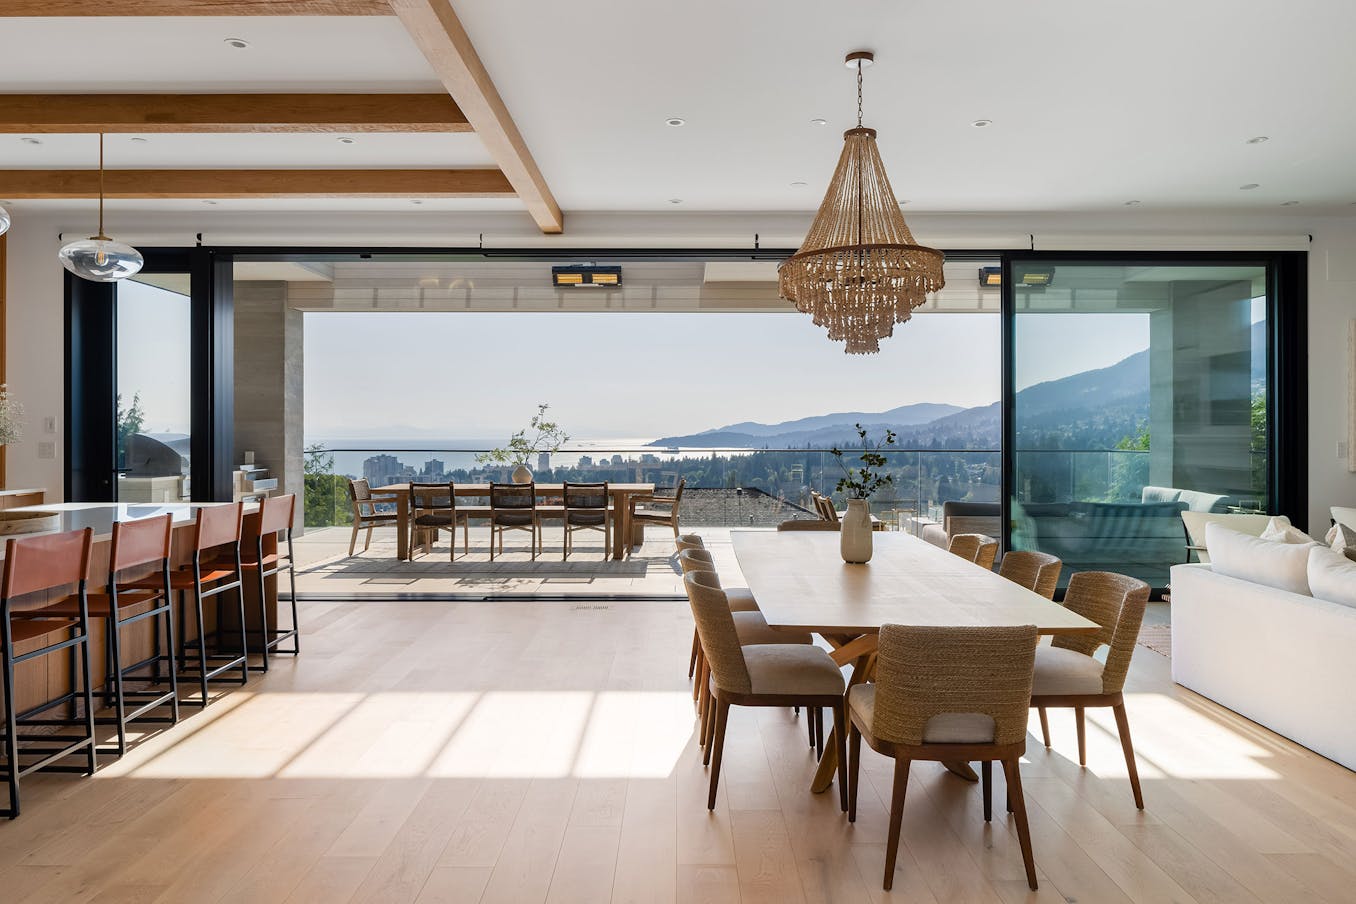 A modern kitchen and dining room with fully automated large opening glass walls, offering breathtaking views of the ocean